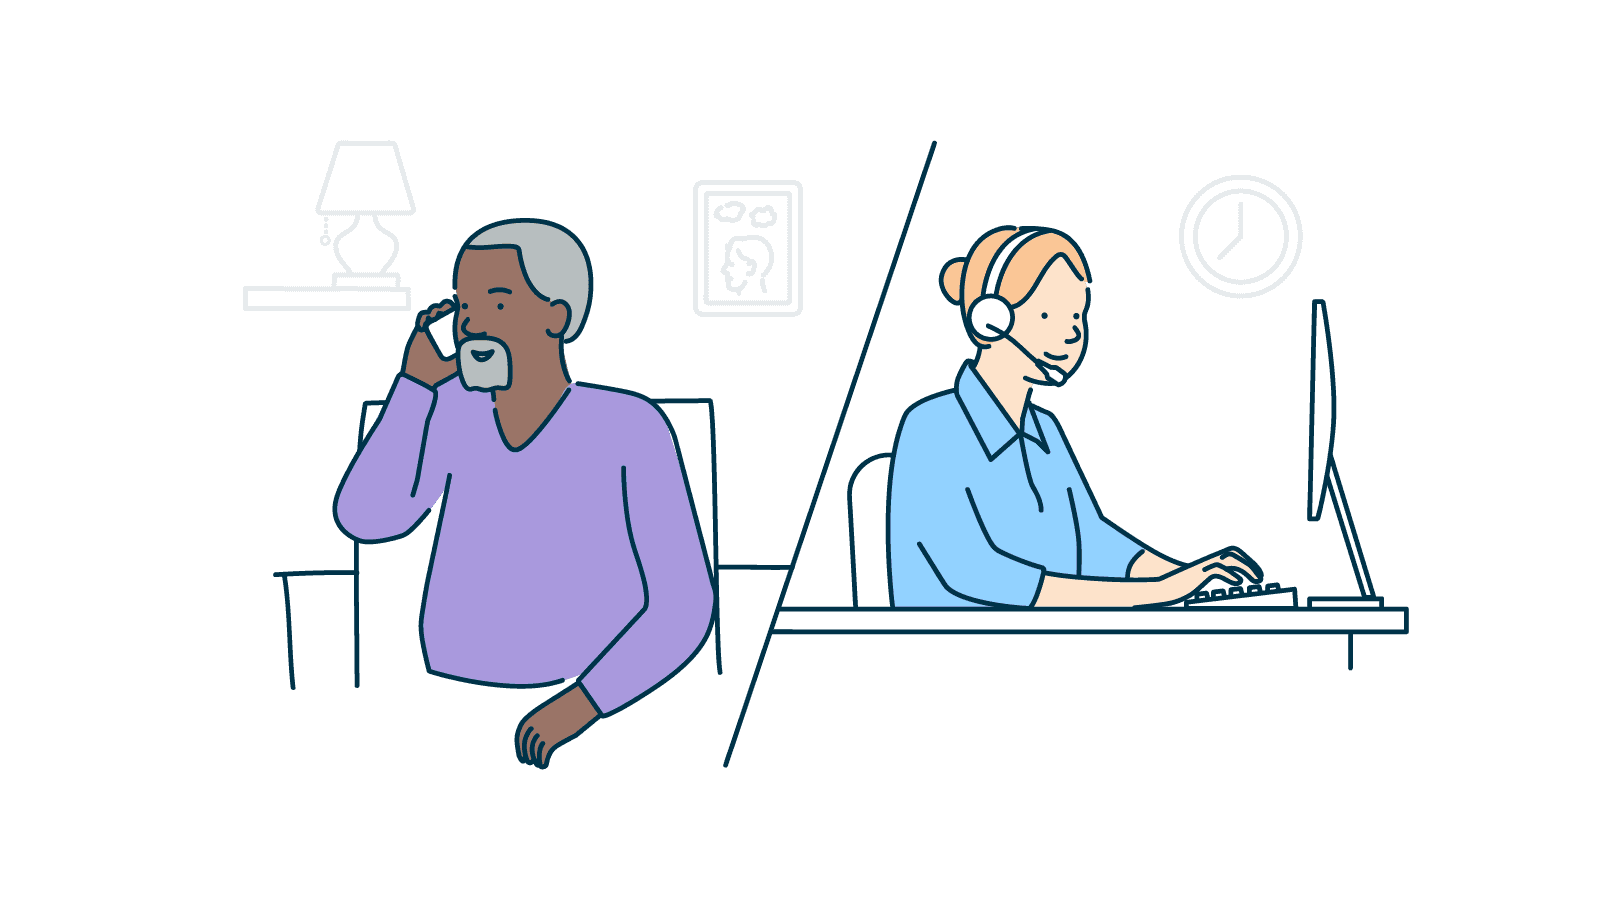 An illustration on a man making a phone call and a Helpline operator answering.